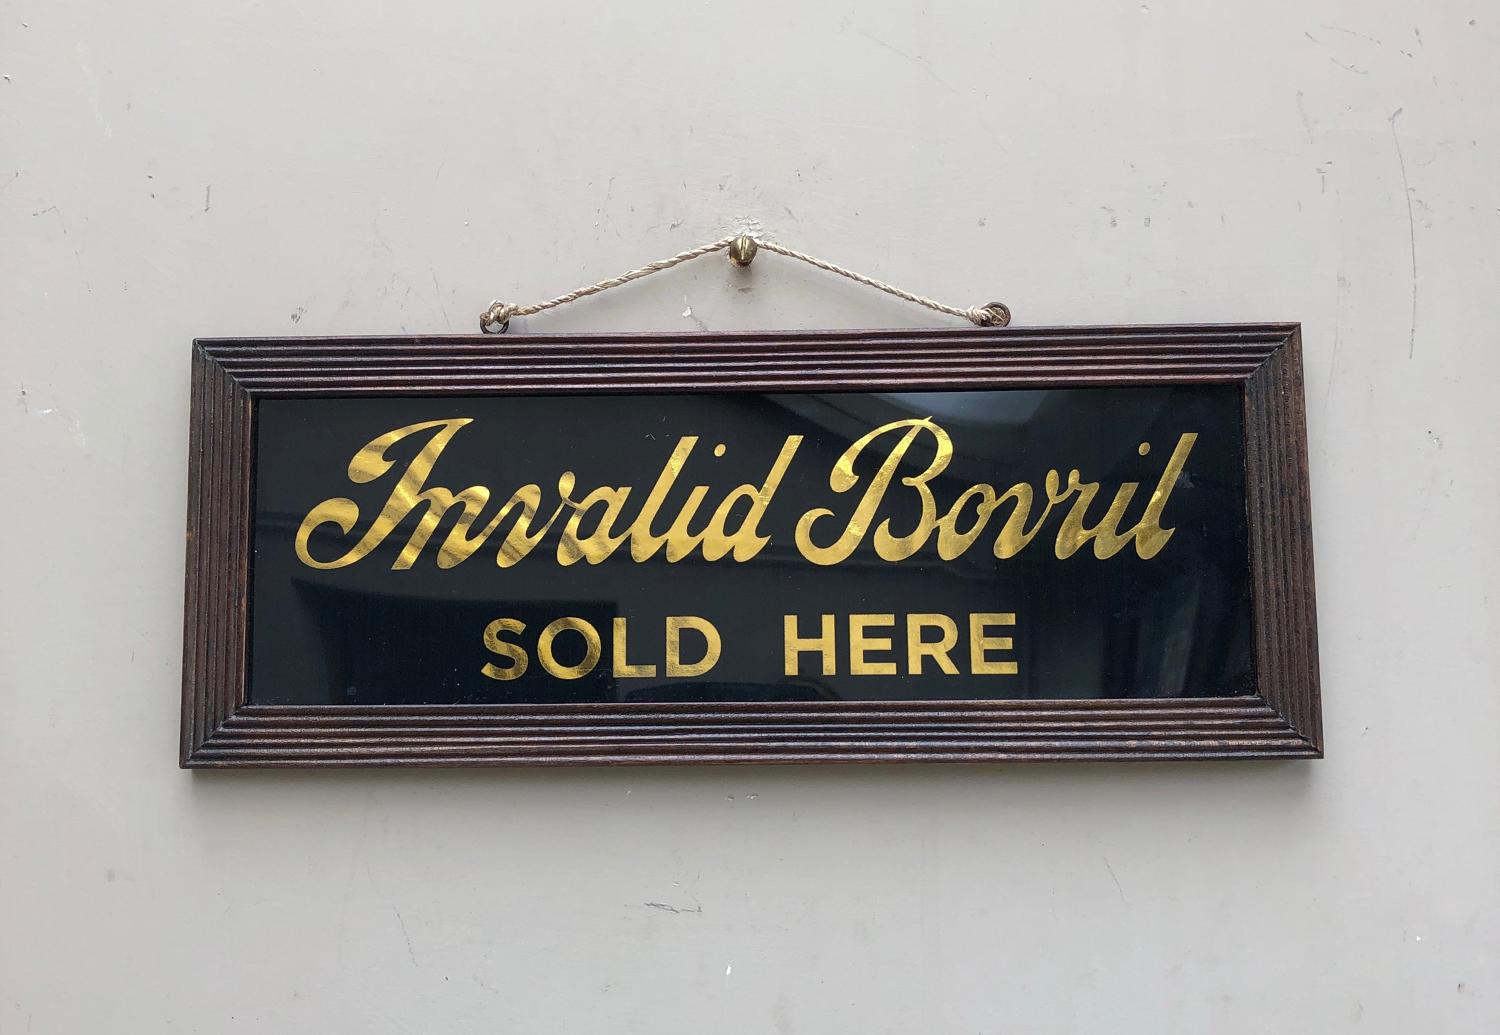 1950-60s Shops Advertising Sign - Invalid Bovril Sold Here